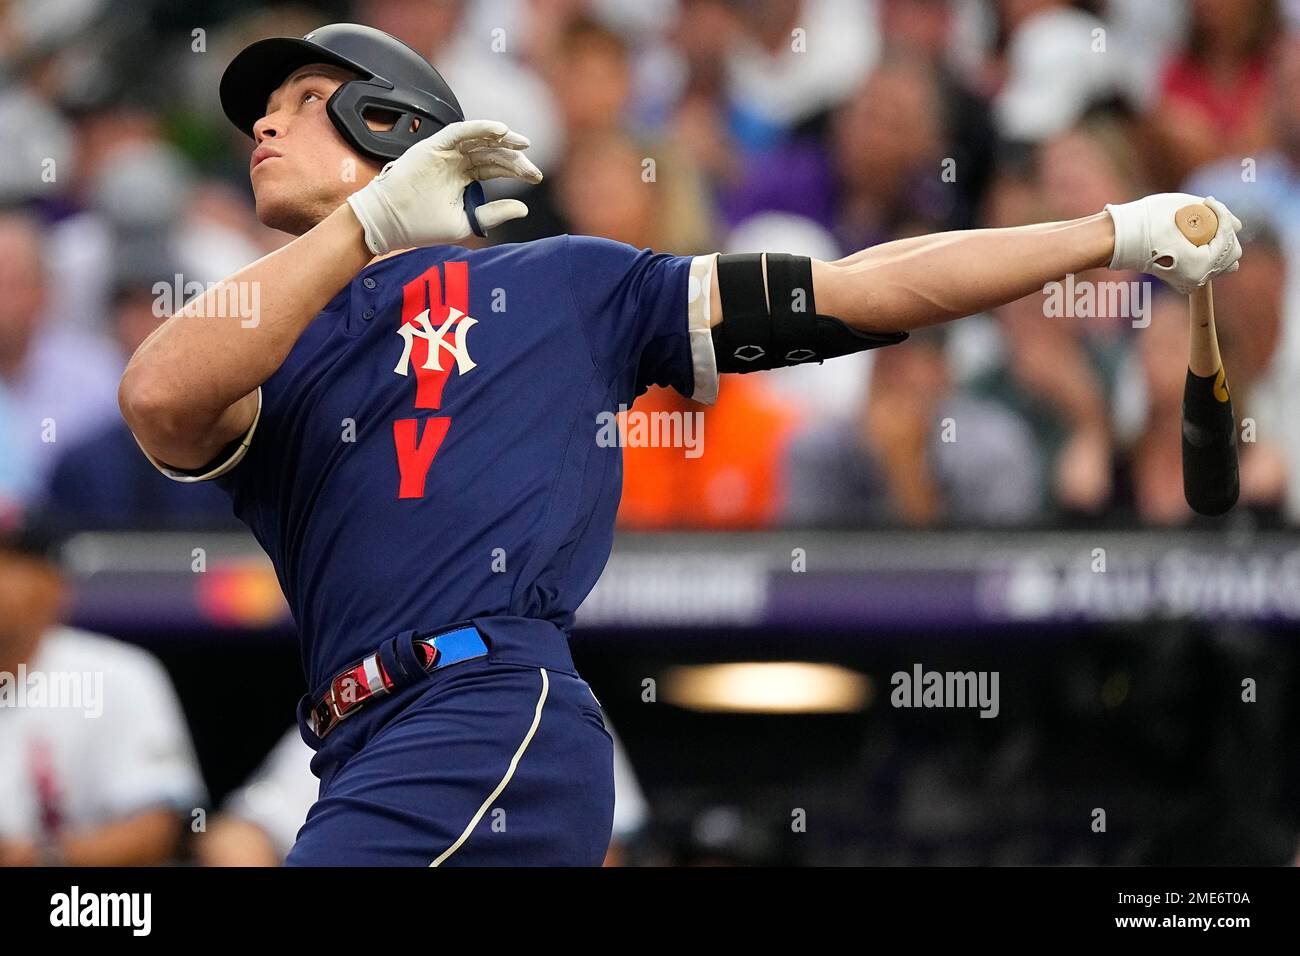 American League's Aaron Judge, of the New York Yankees, looks on